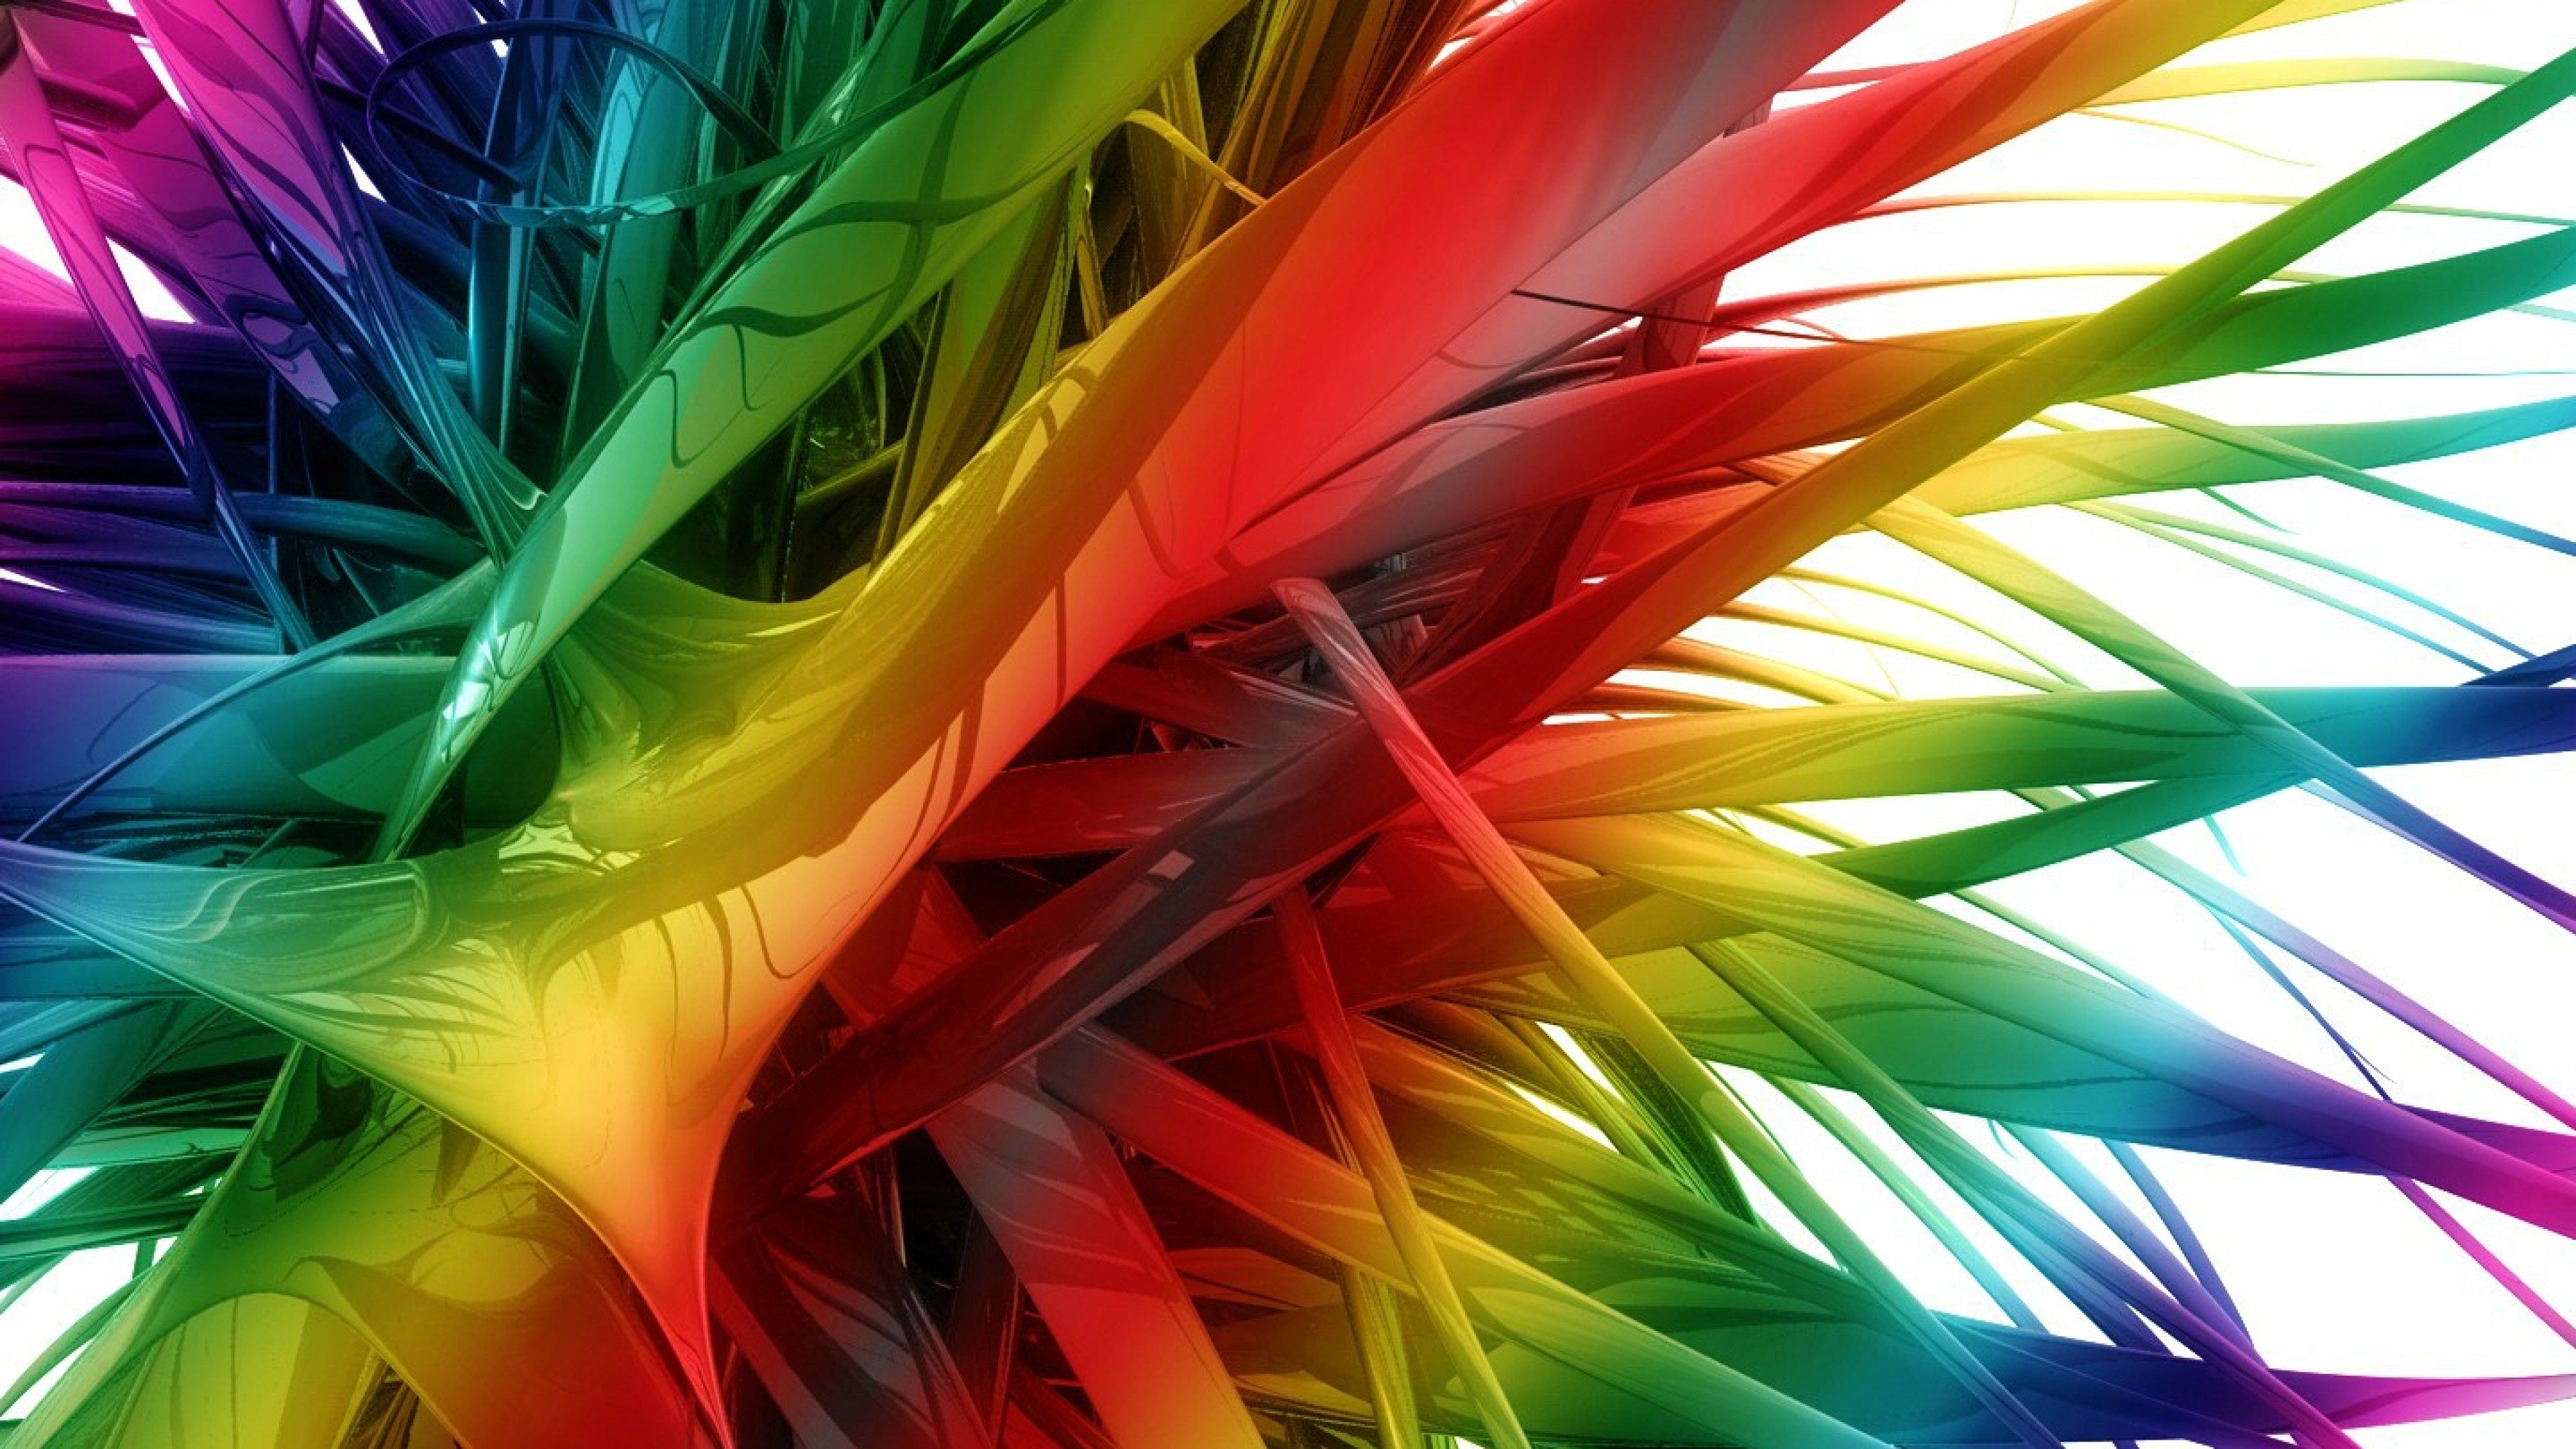 Spikes Coloured Wallpaper for Desktop and Mobiles 4K Ultra HD